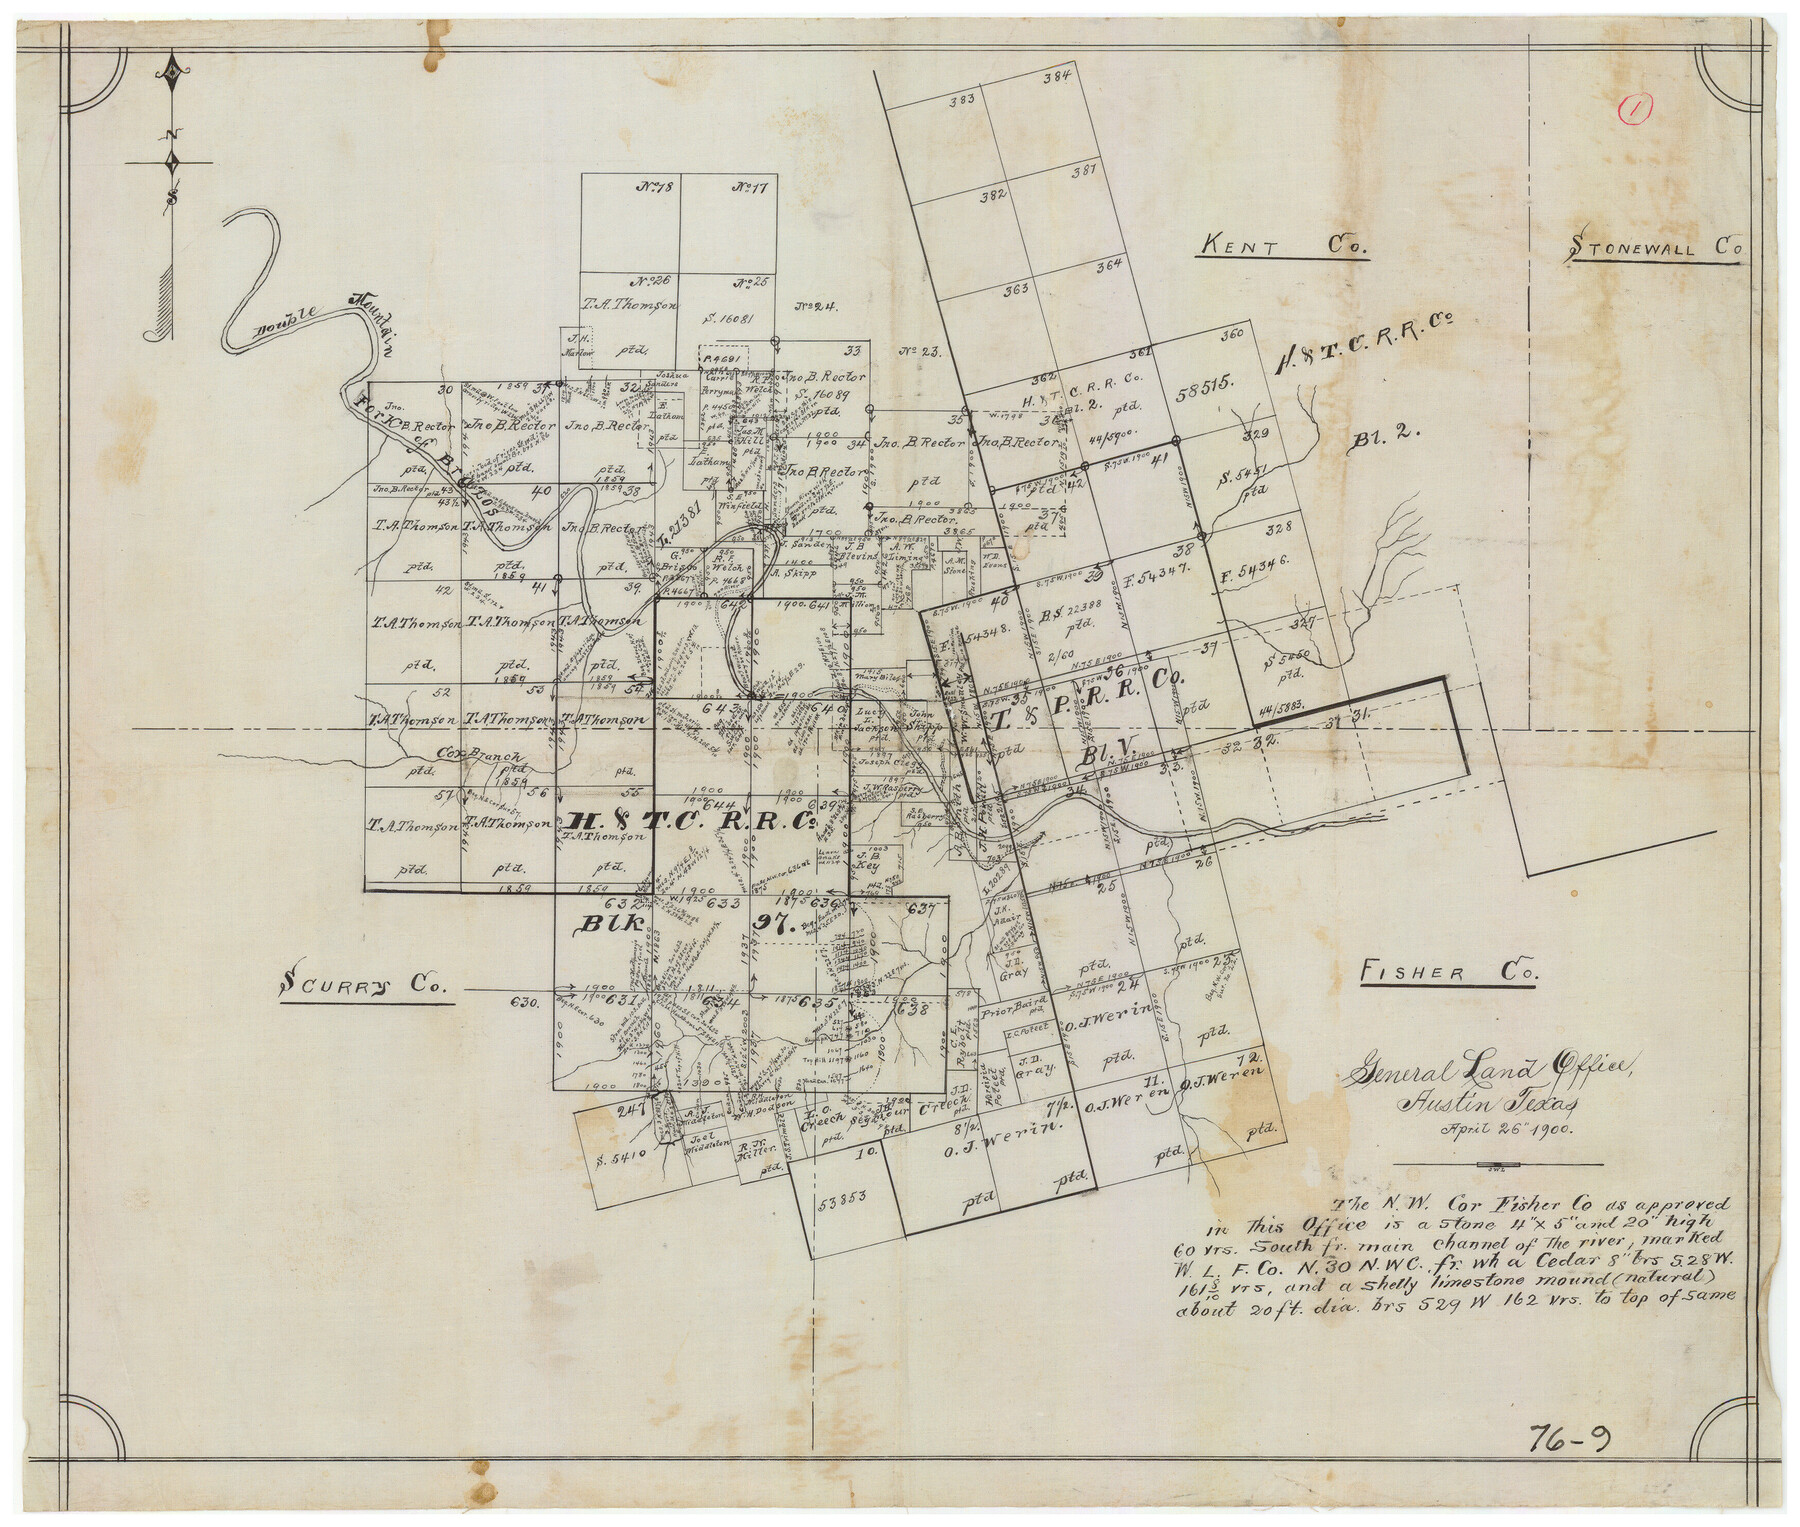 90917, [Sketch showing Northwest corner of Fisher County, Northeast corner of Scurry County and South part of Kent County], Twichell Survey Records